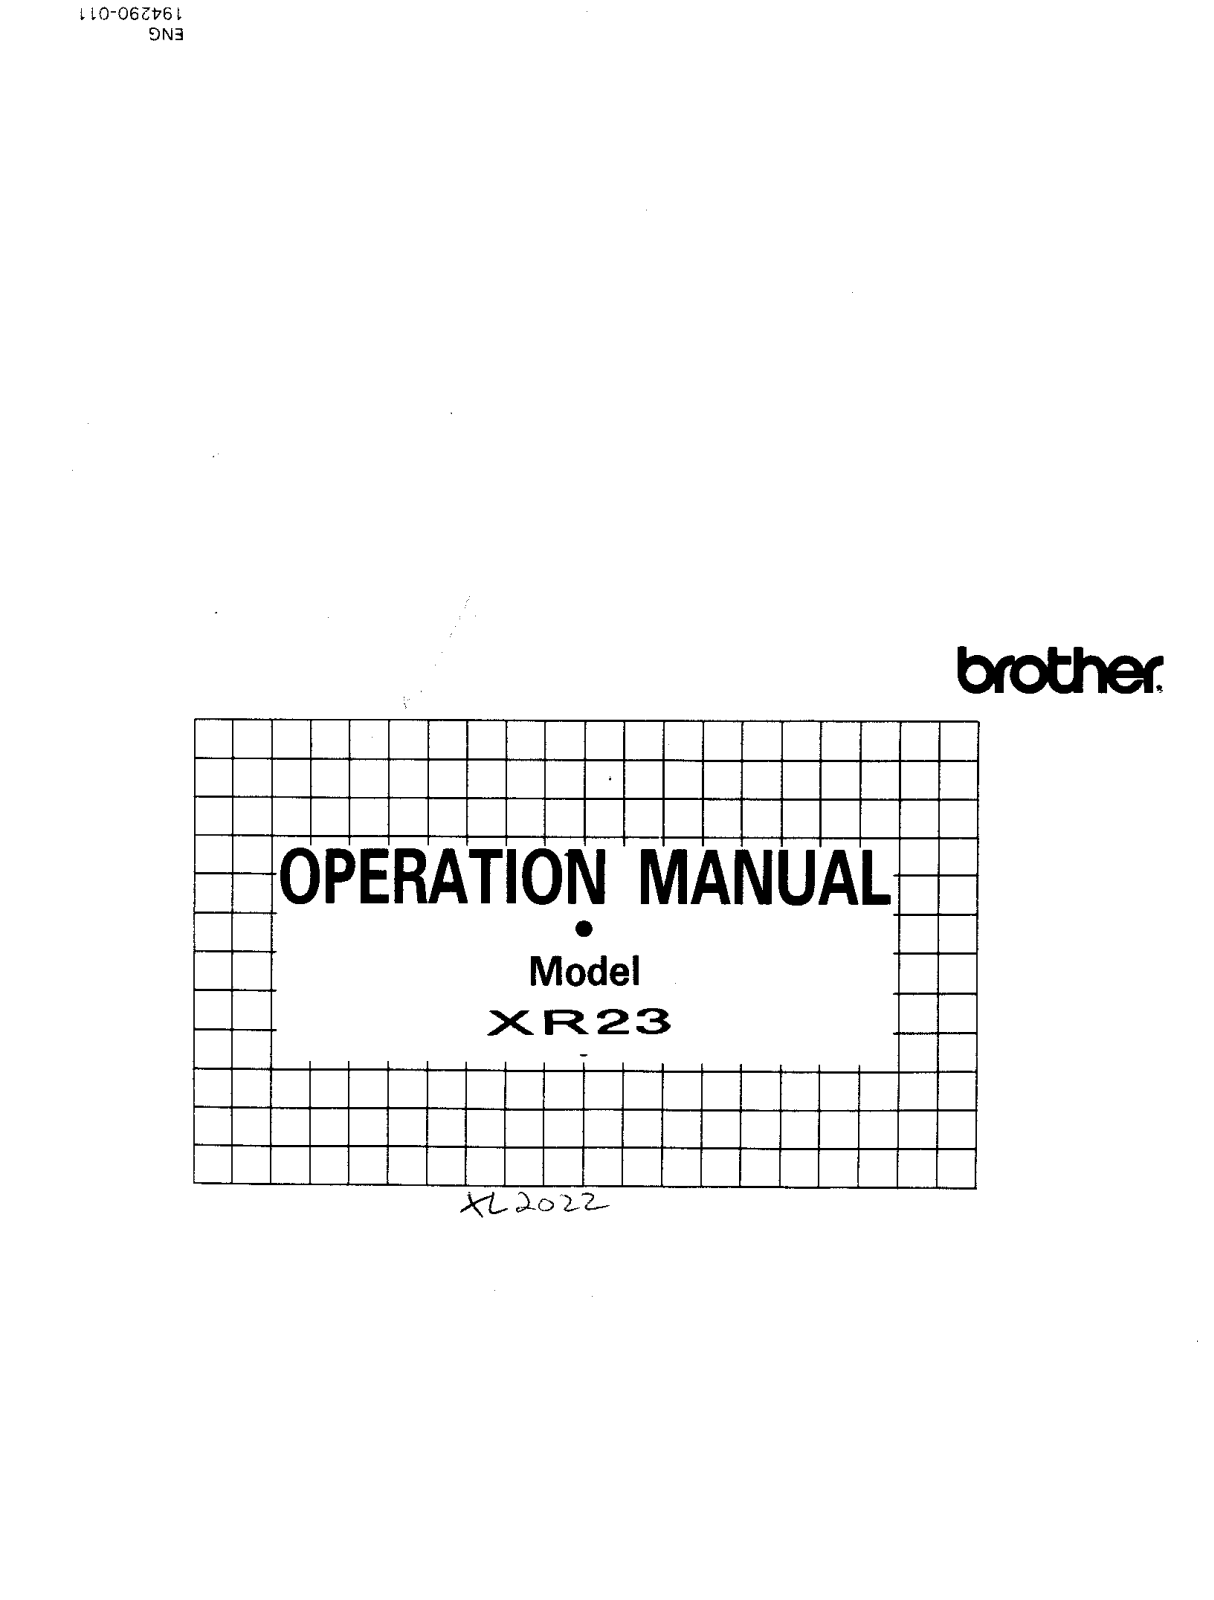 Brother XL-2022 Owner's Manual